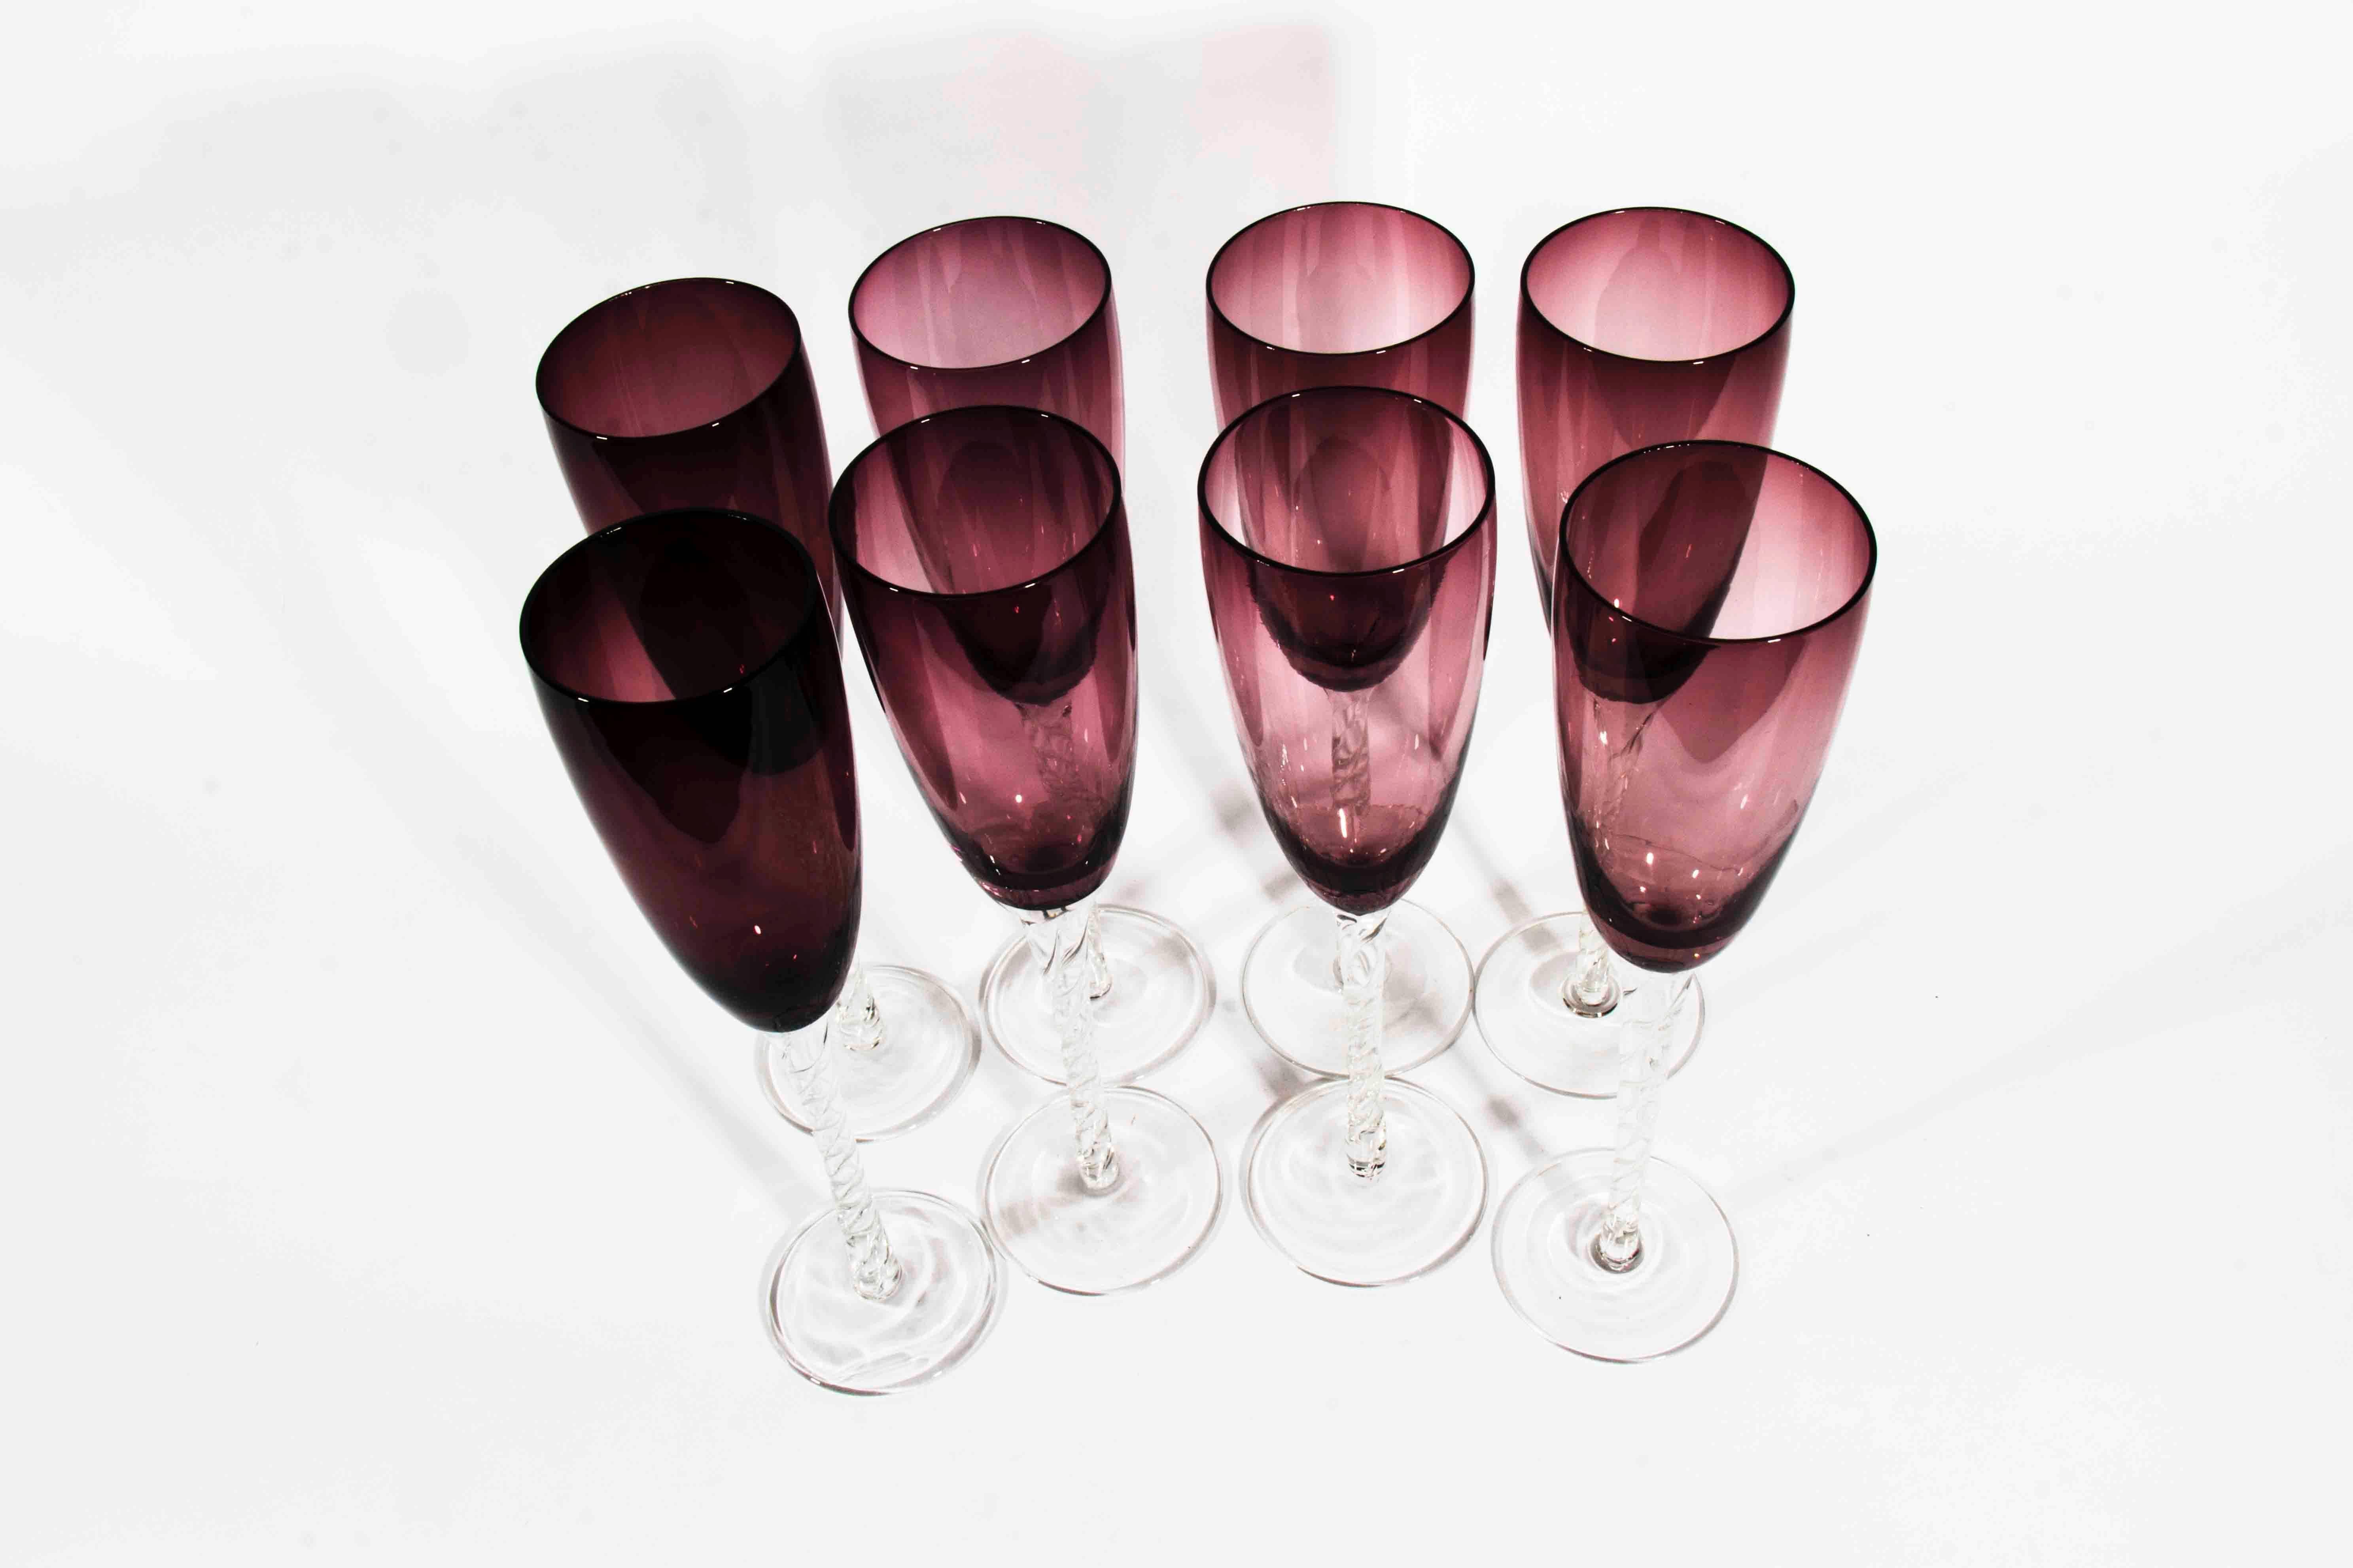 Twelve vintage amethyst crystal champagne flutes with clear stem excellent condition. Each glass measure 10 inches high x 2.5 inches diameter.